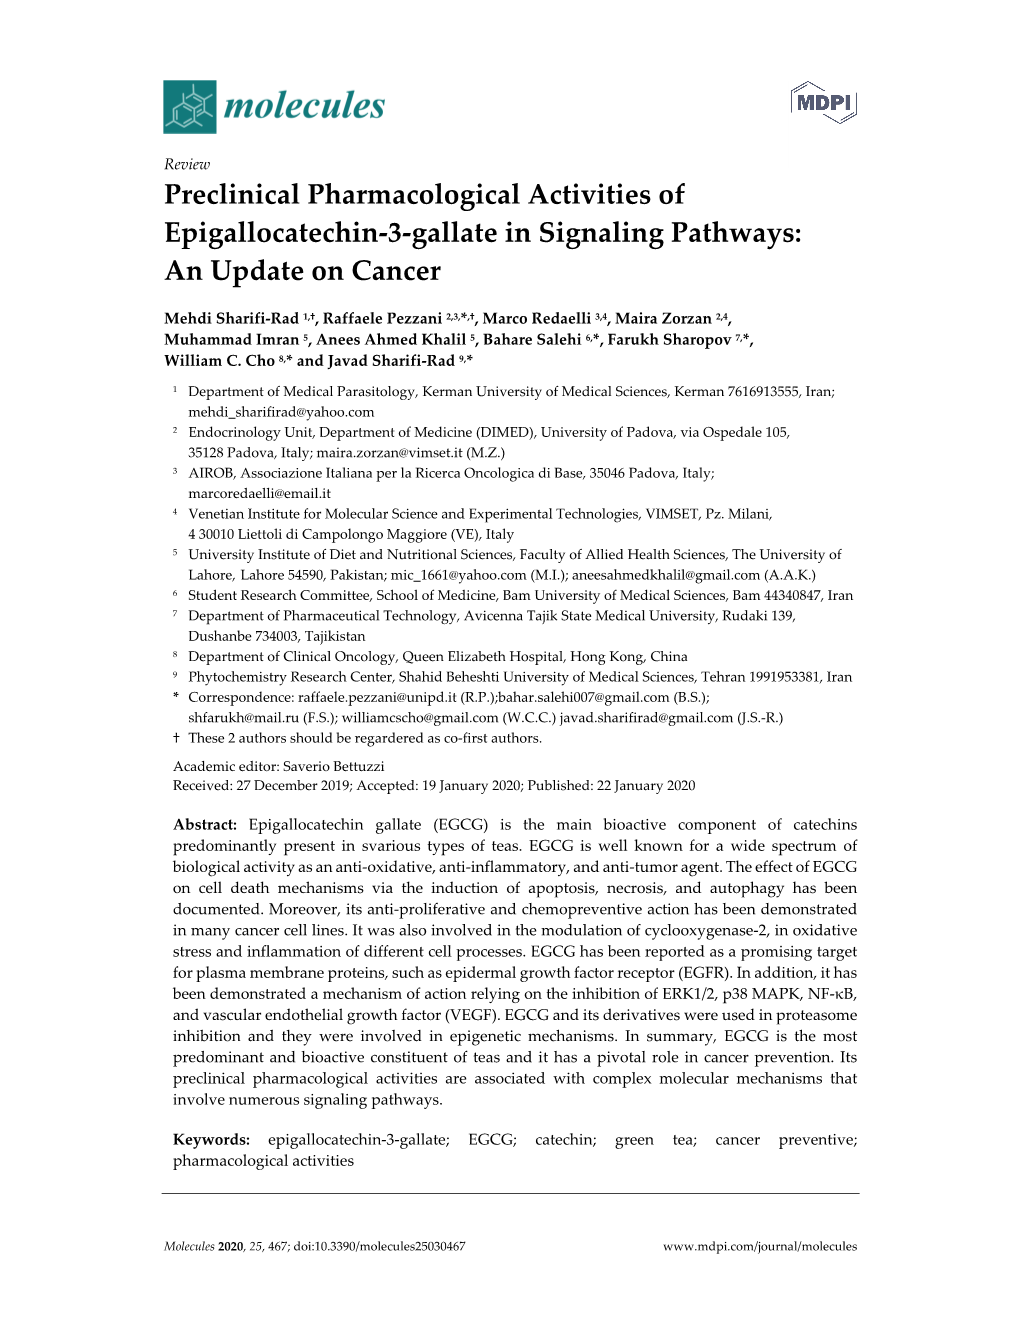 Preclinical Pharmacological Activities of Epigallocatechin-3-Gallate In